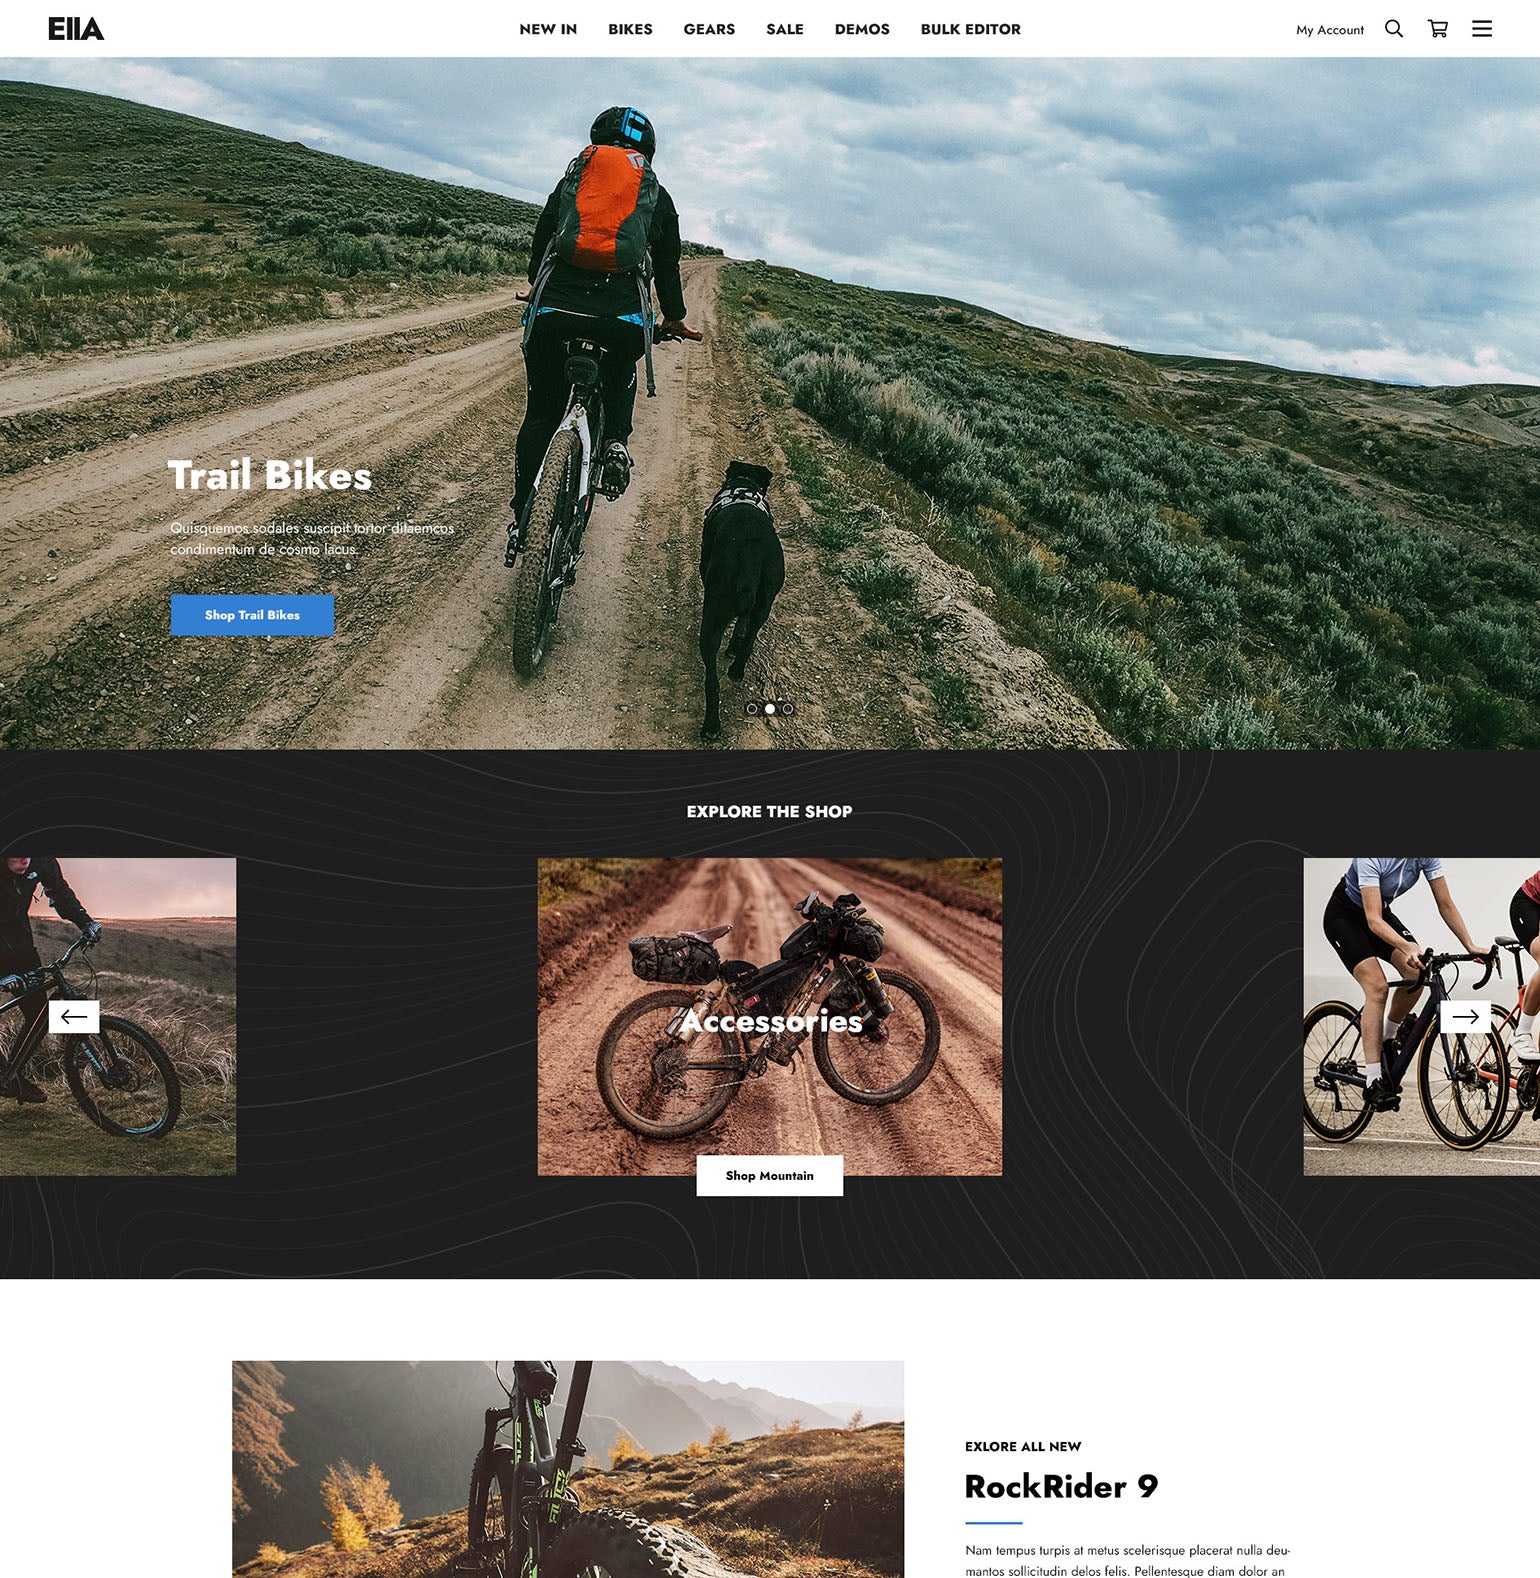 Ella Shopify Theme - Cycling Apparel Ecommerce Website Template